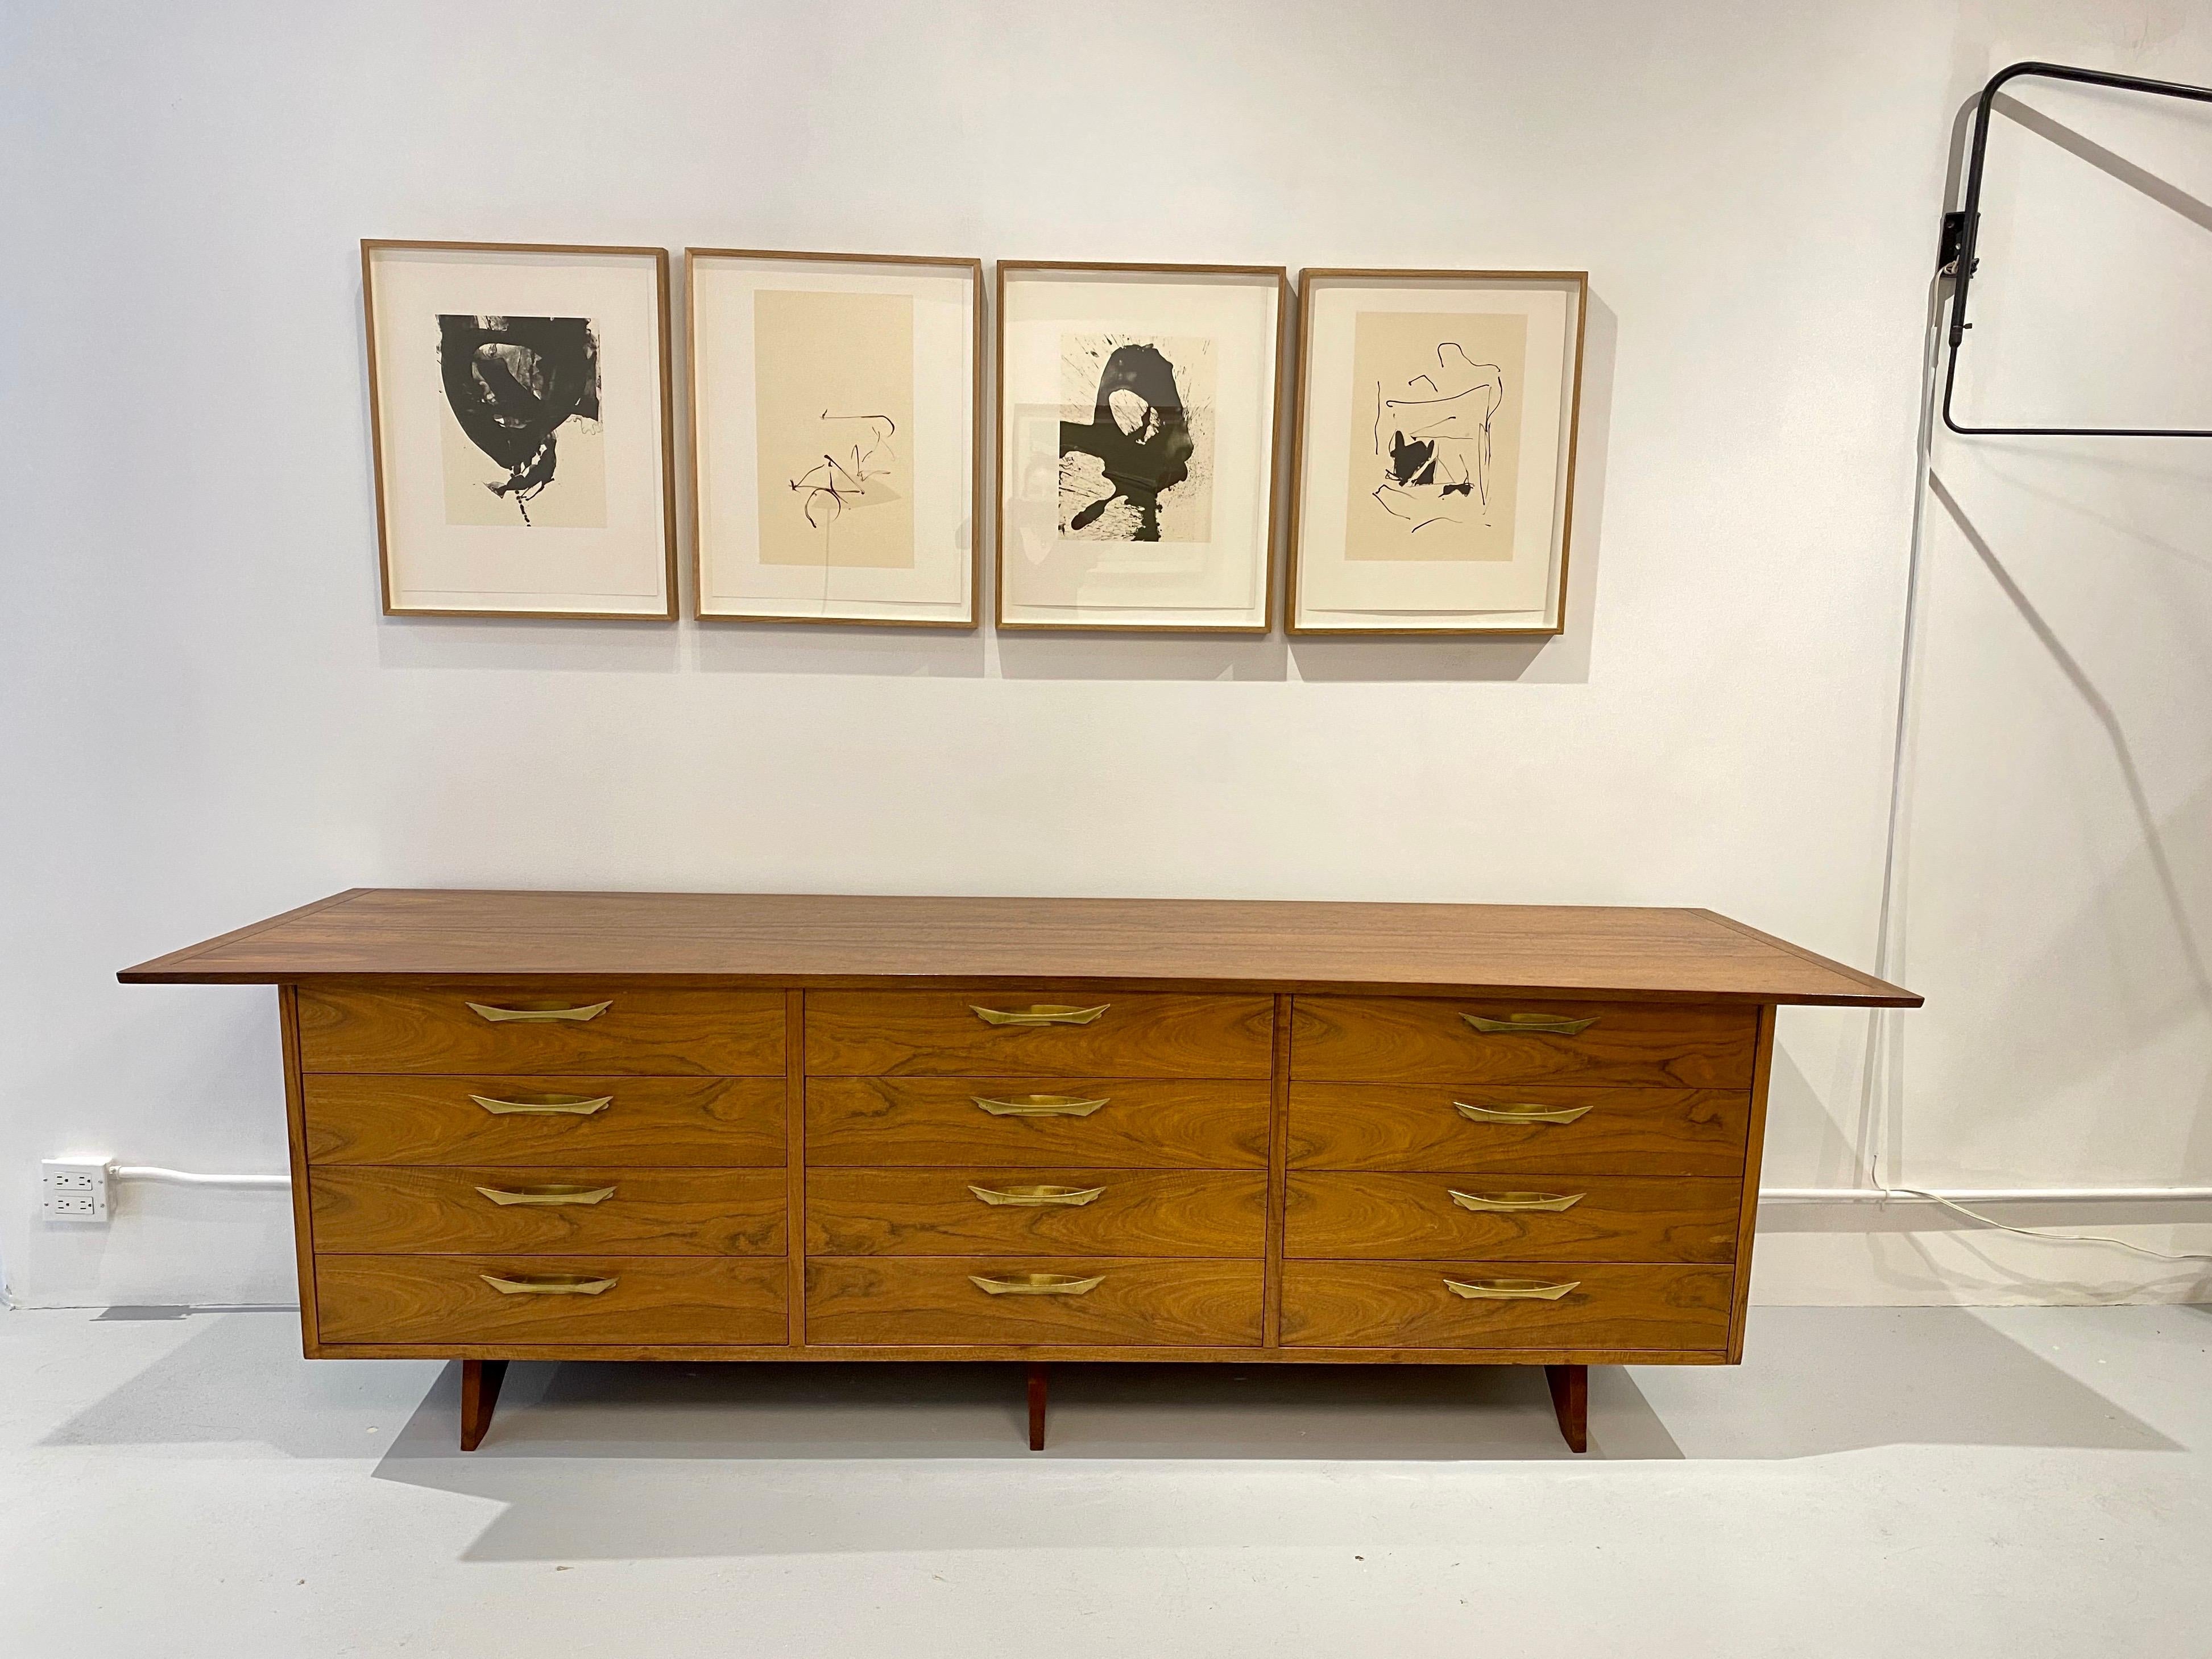 Chest of 12 drawers by George Nakashima, model OH - 212 L with bookmatched walnut drawer fronts and brass handles, designed for Widdicomb, circa 1950.
Cabinet retains its fabric label and is branded with manufacturer’s mark to drawer George